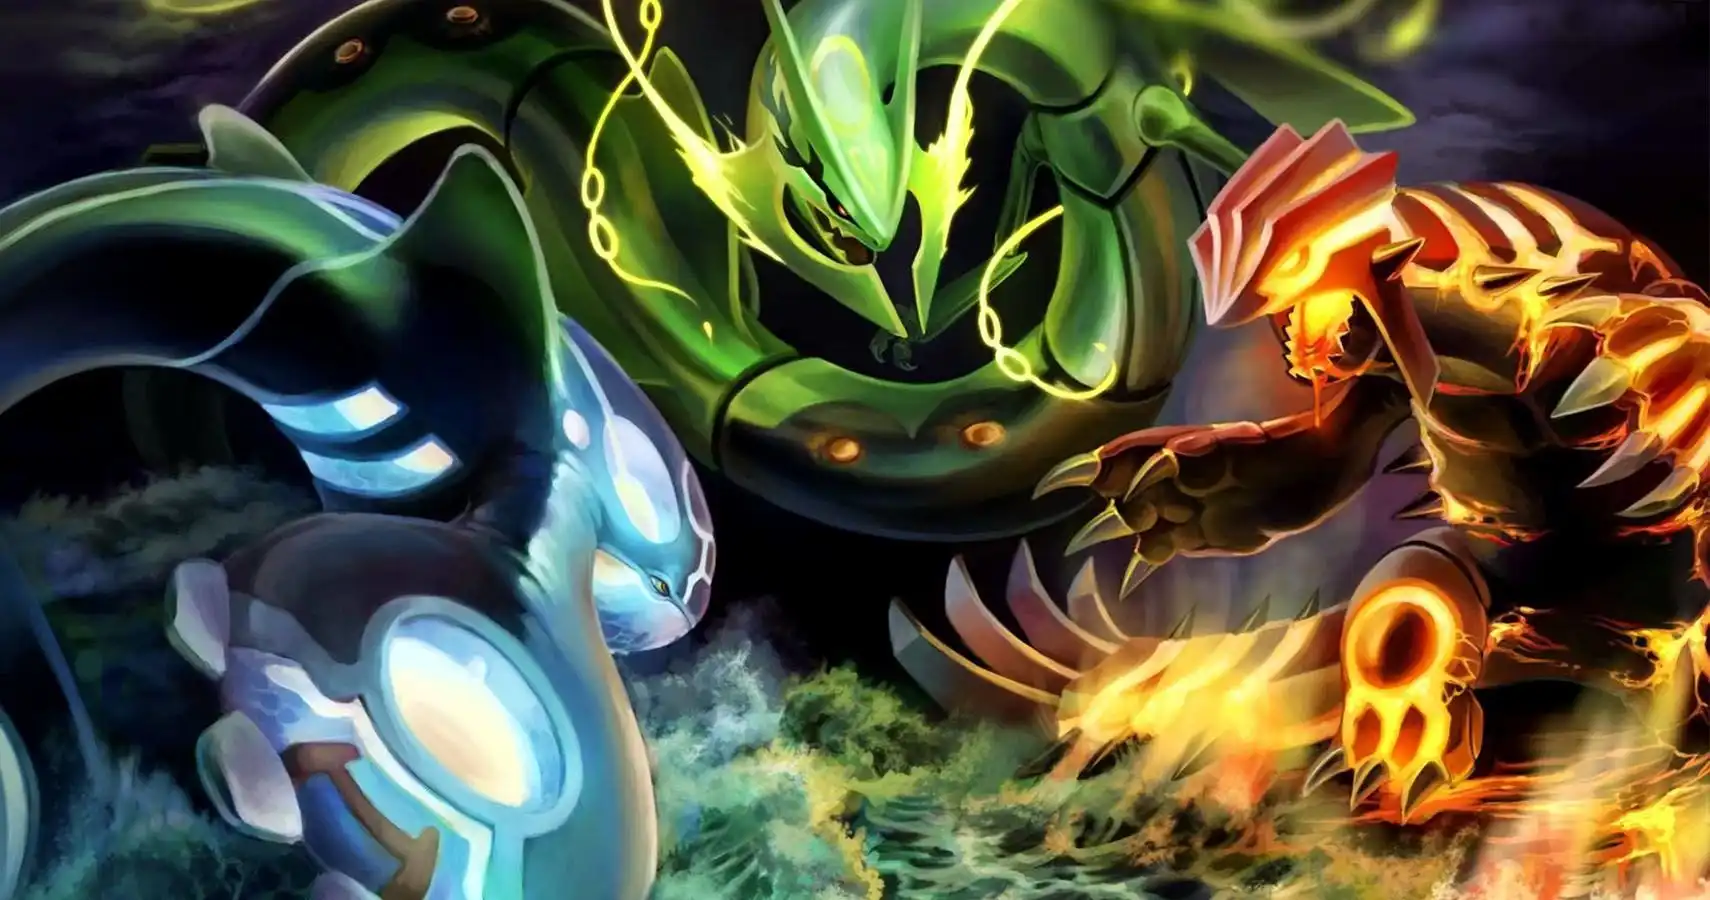 Ranking The Top 15 Legendary Pokémon From Least To Most ...